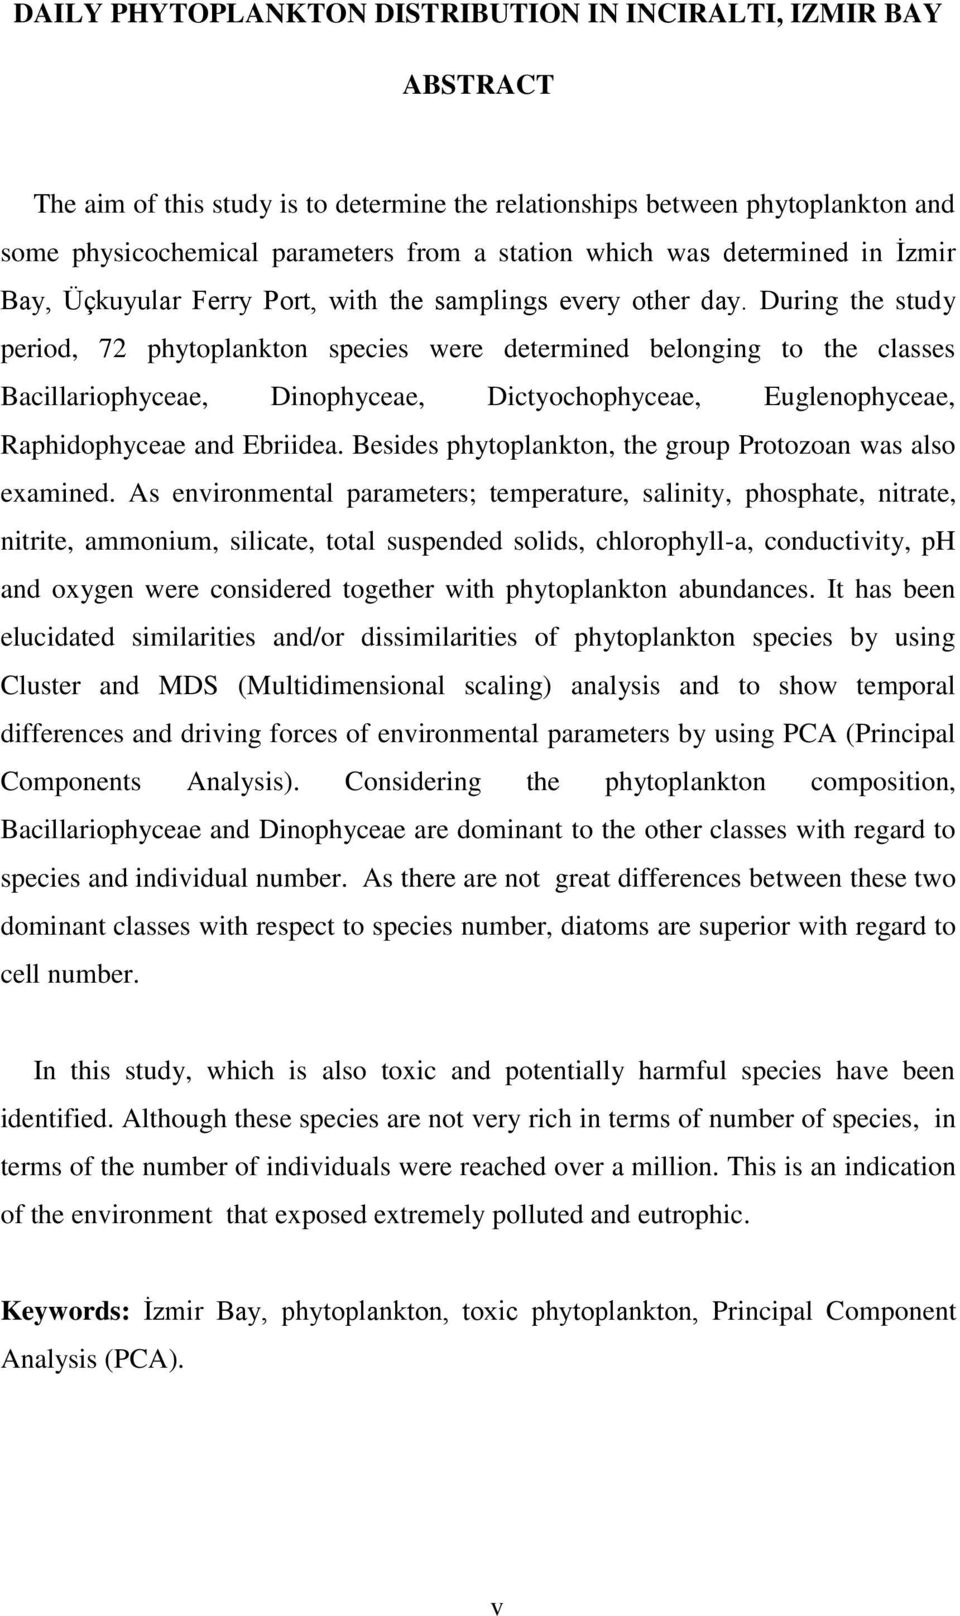 During the study period, 72 phytoplankton species were determined belonging to the classes Bacillariophyceae, Dinophyceae, Dictyochophyceae, Euglenophyceae, Raphidophyceae and Ebriidea.